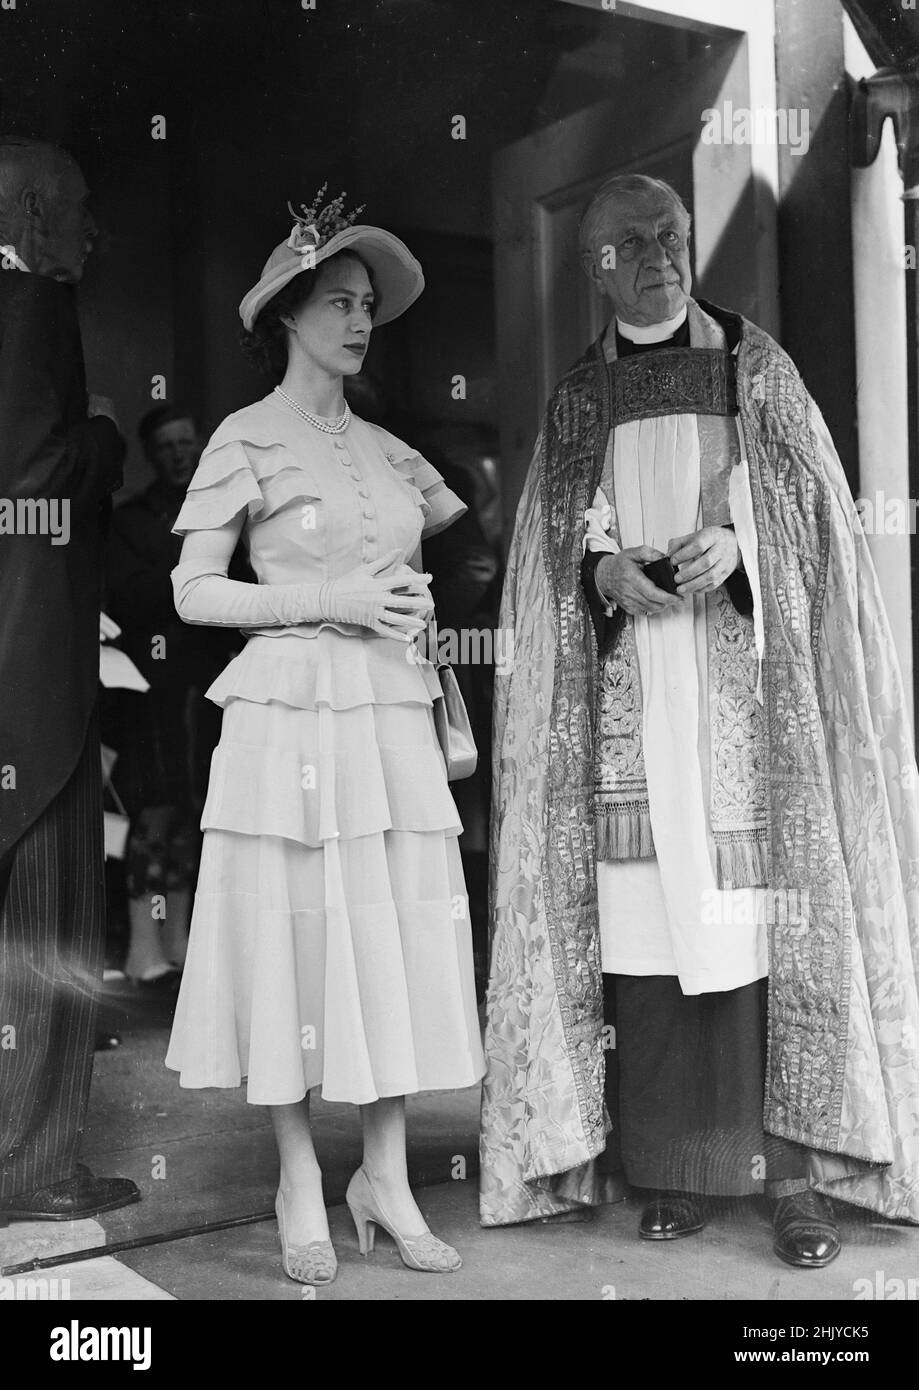 LONDON - JULY 26: Princess Margaret at the wedding of her friend Miss Rachel Brand to William Douglas Home, at St. Peters, Eaton Square. London, on July 26, 1951. Credit: The DL Archive Collection/Alamy Stock Photo